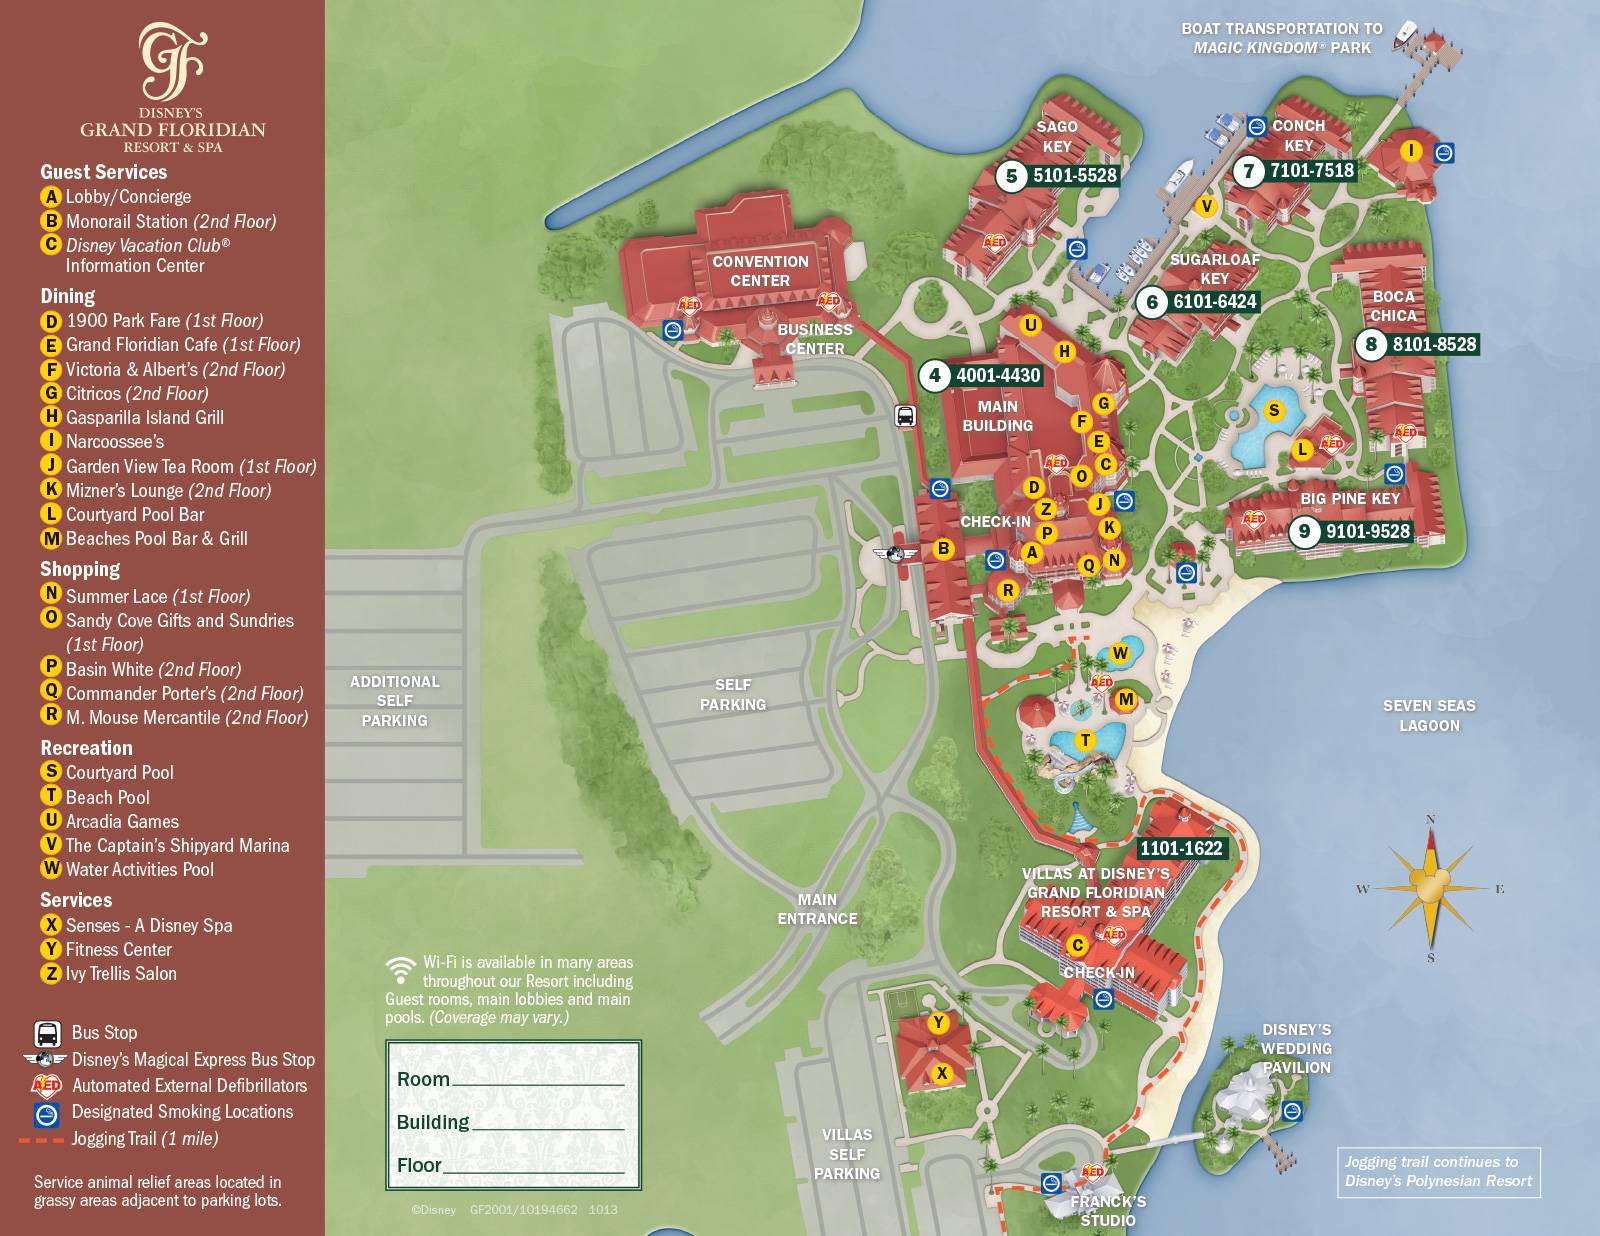 2013 Grand Floridian guide map